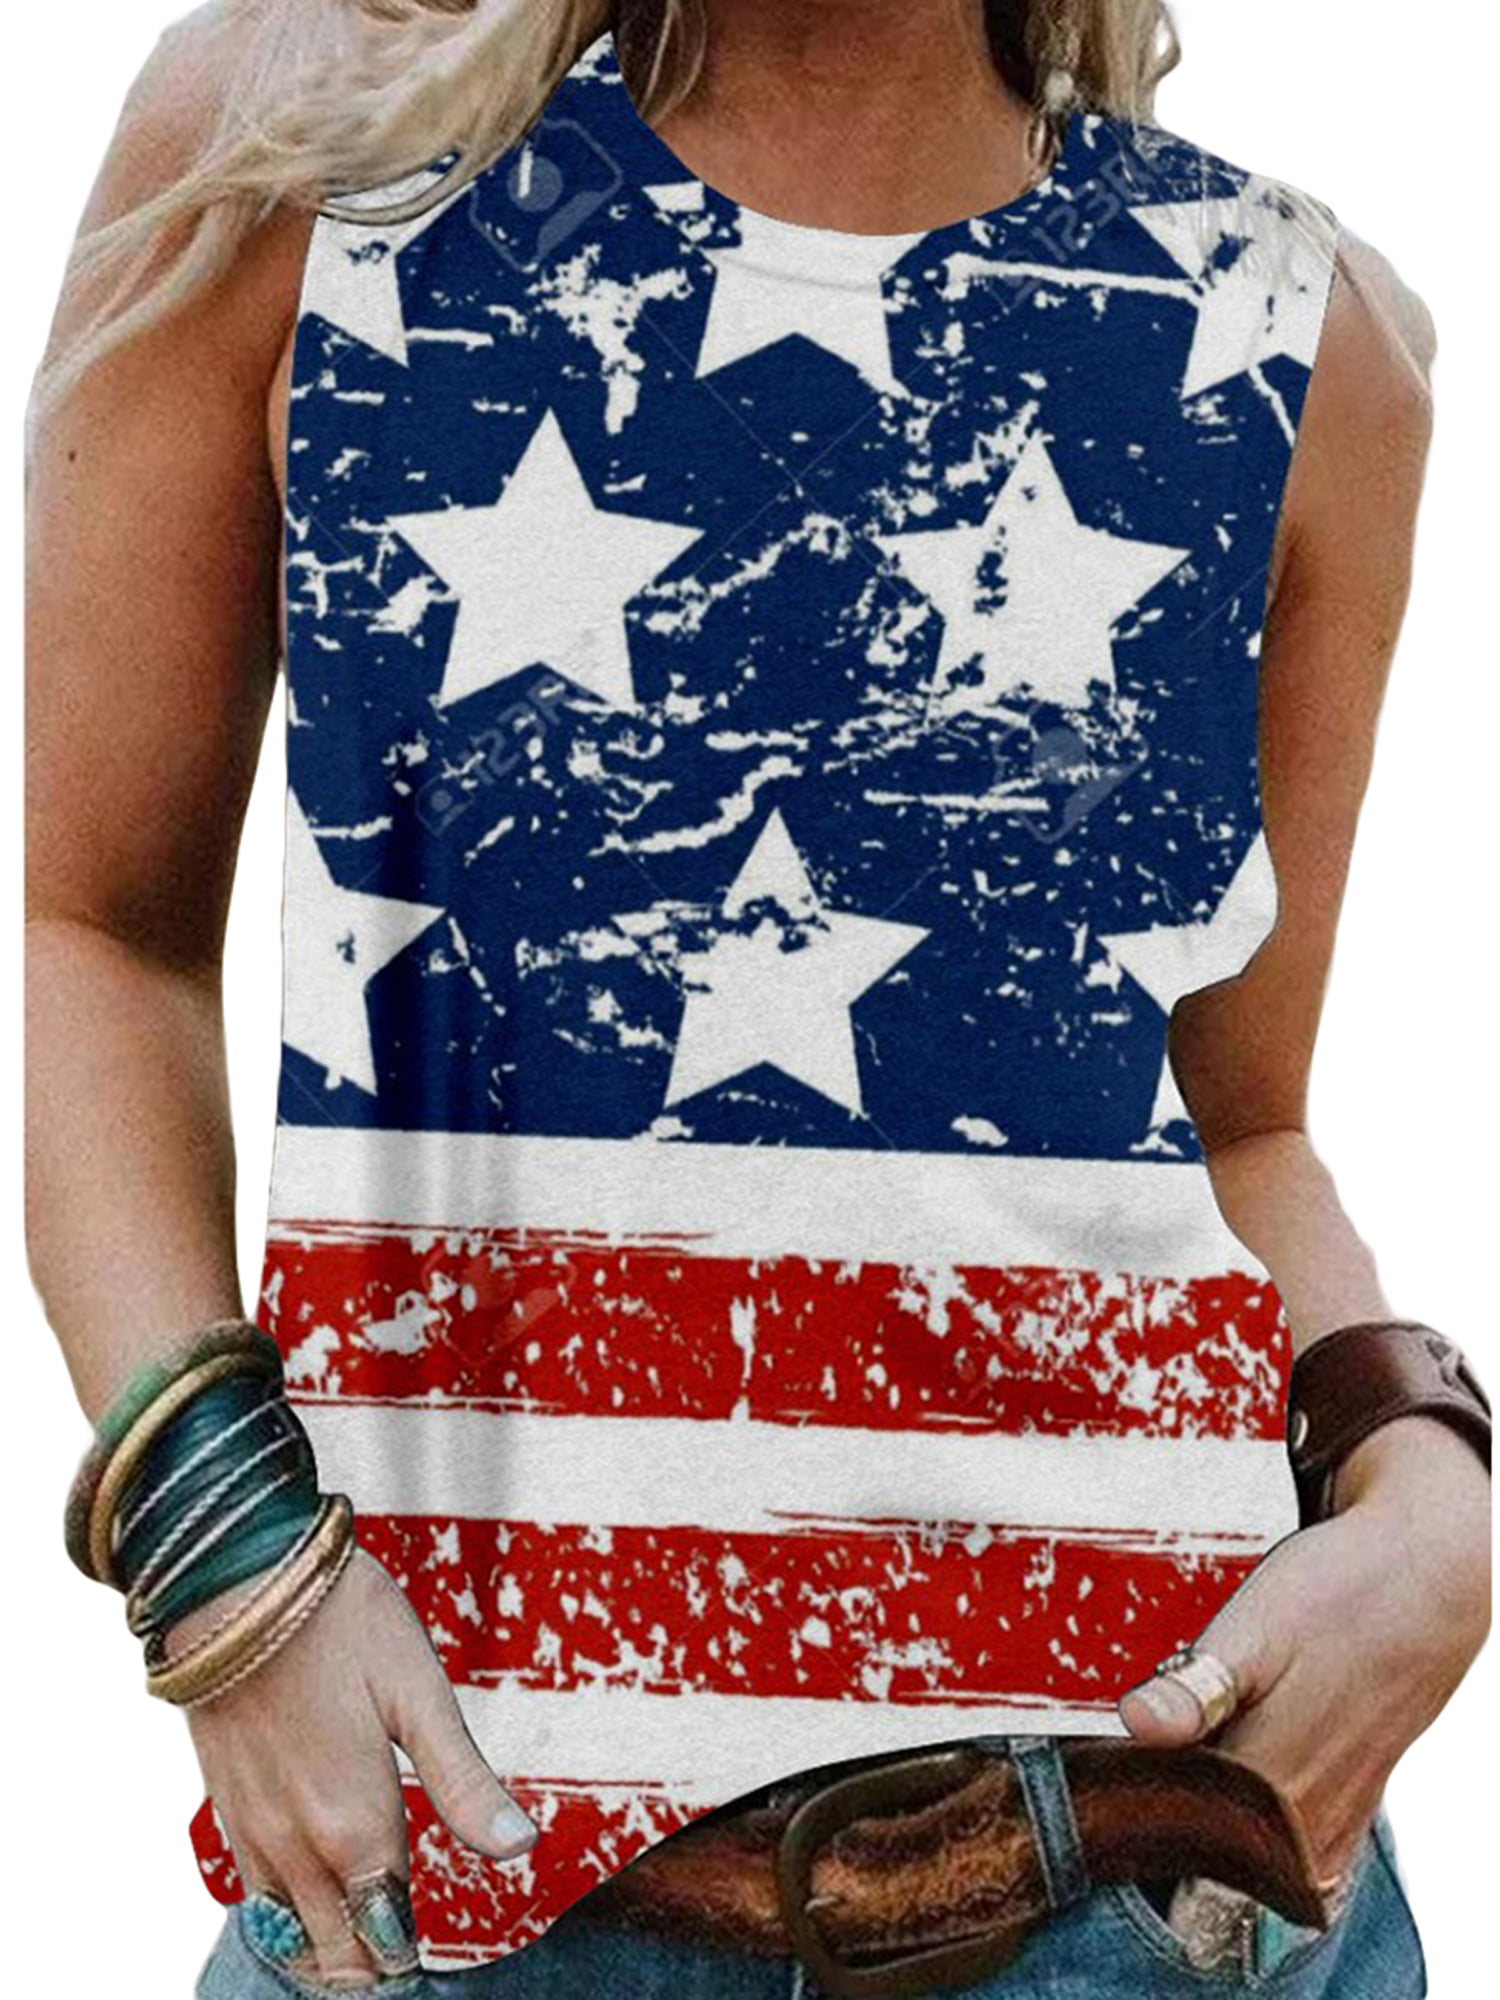 Women's 4th of July Tank Top Sleeveless Patriotic T-Shirt Tops Vintage Independence Day Shirts Summer Loose Vest Tee 